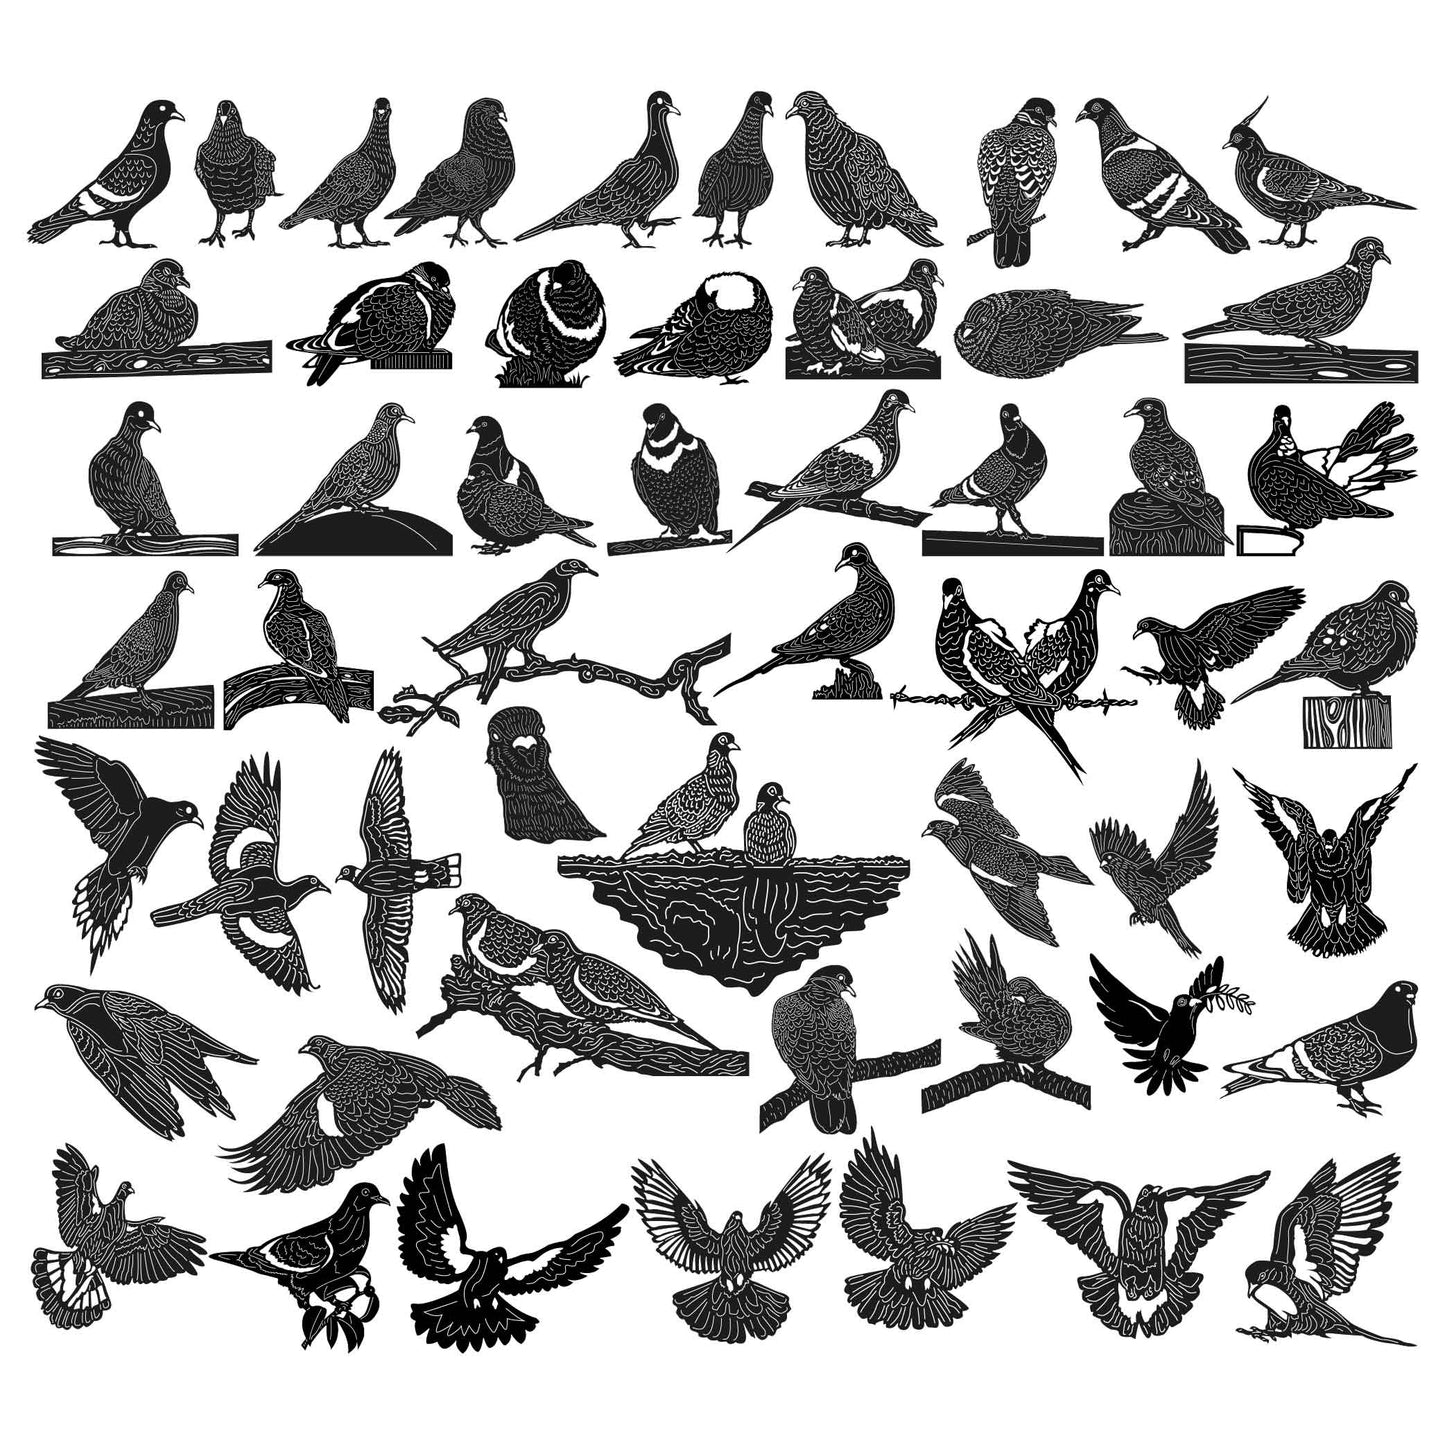 Doves and Pigeons Birds-DXF files Cut Ready for CNC-DXFforCNC.com